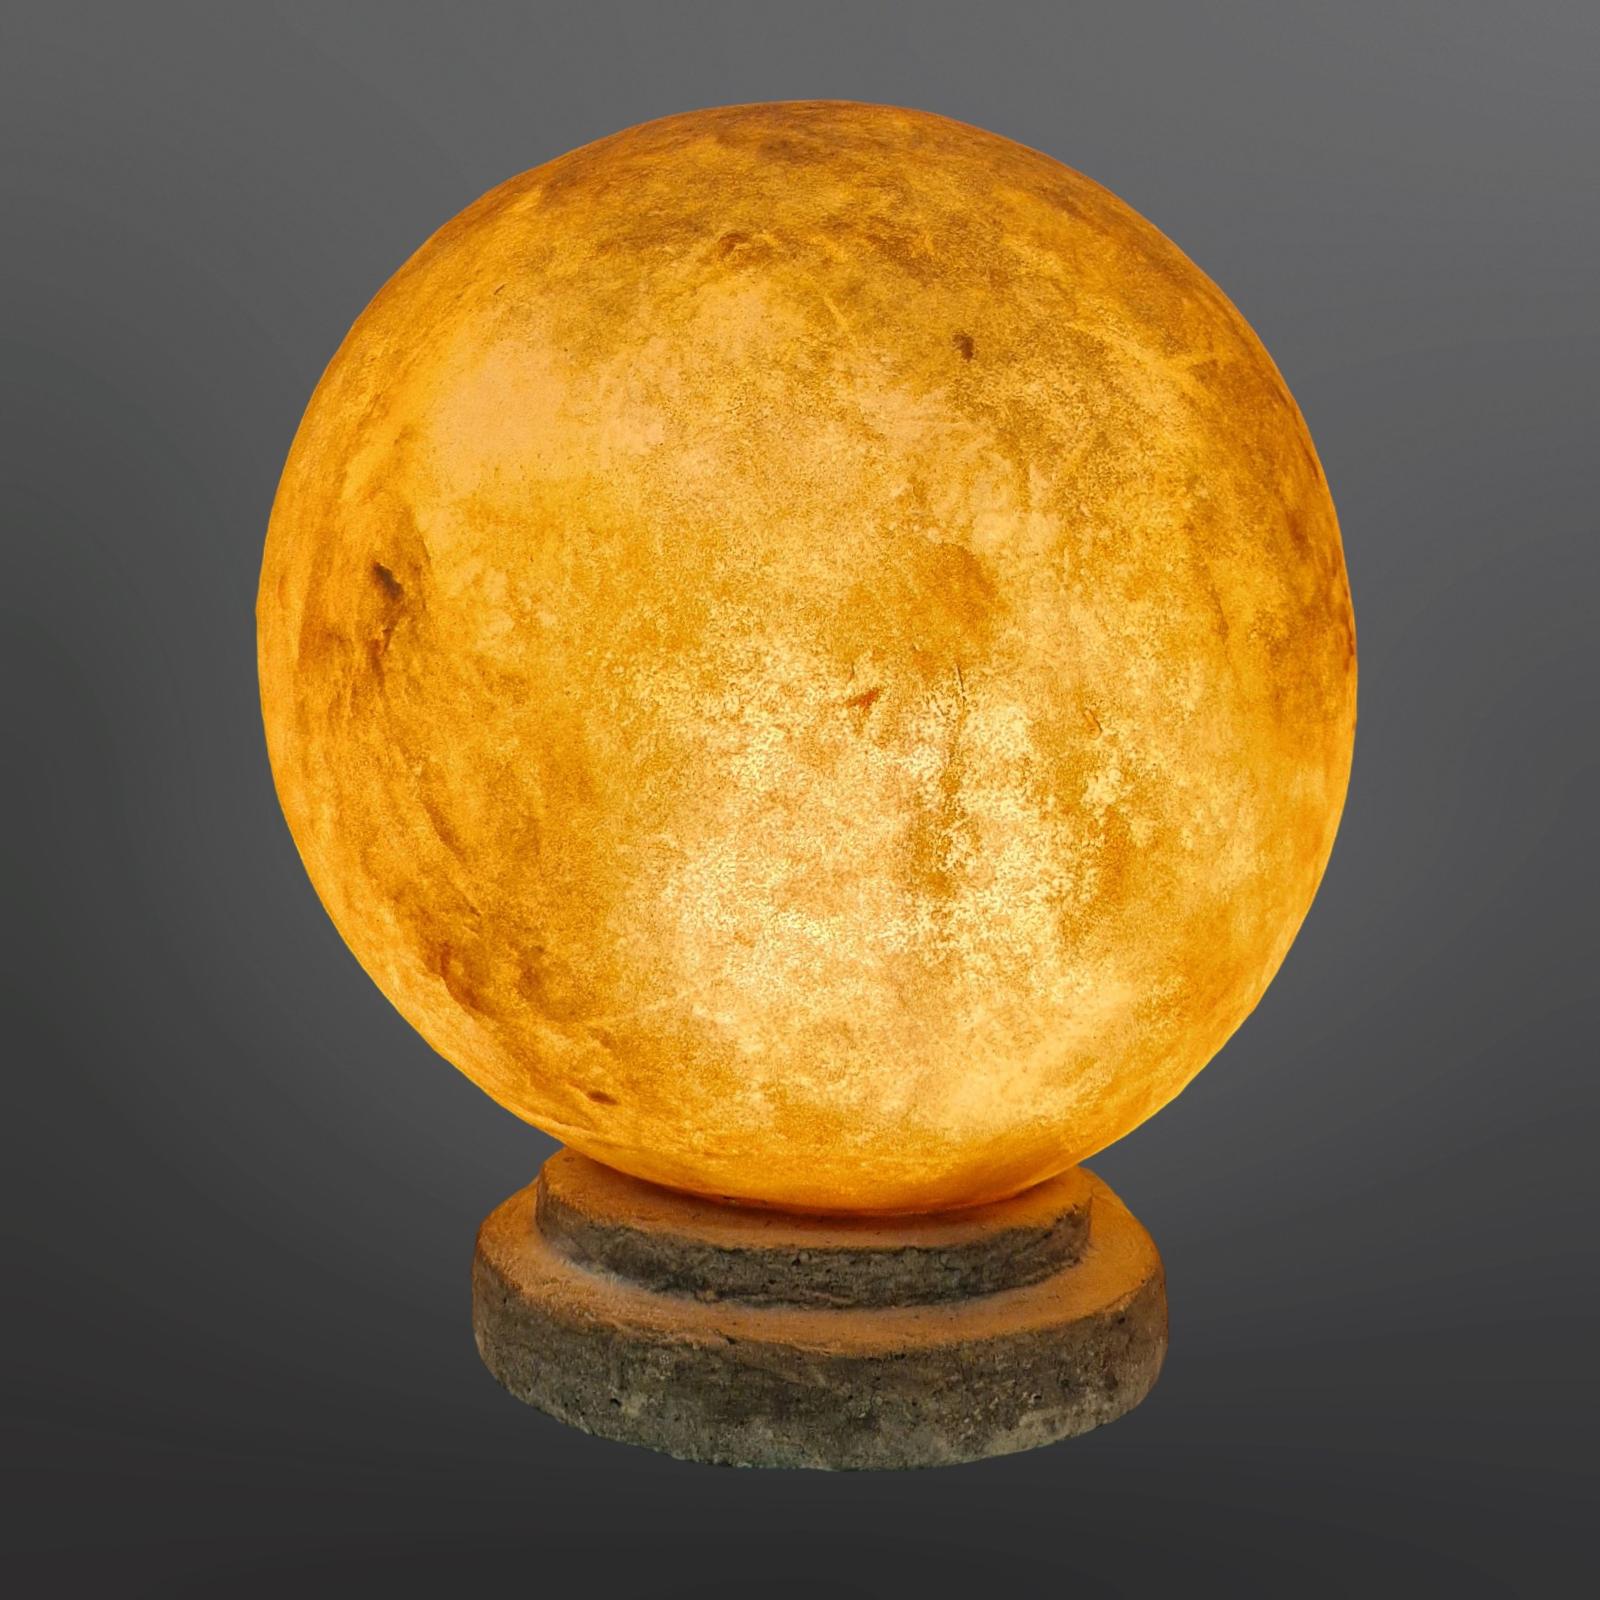 Space age table lamp. In the style of the moon rock lamp series by Andre Cazenave. The globe is made from fiberglass with ground mineral powder giving it a moon like appearance in both the off and on situation. The lamp emits a stunning warm and